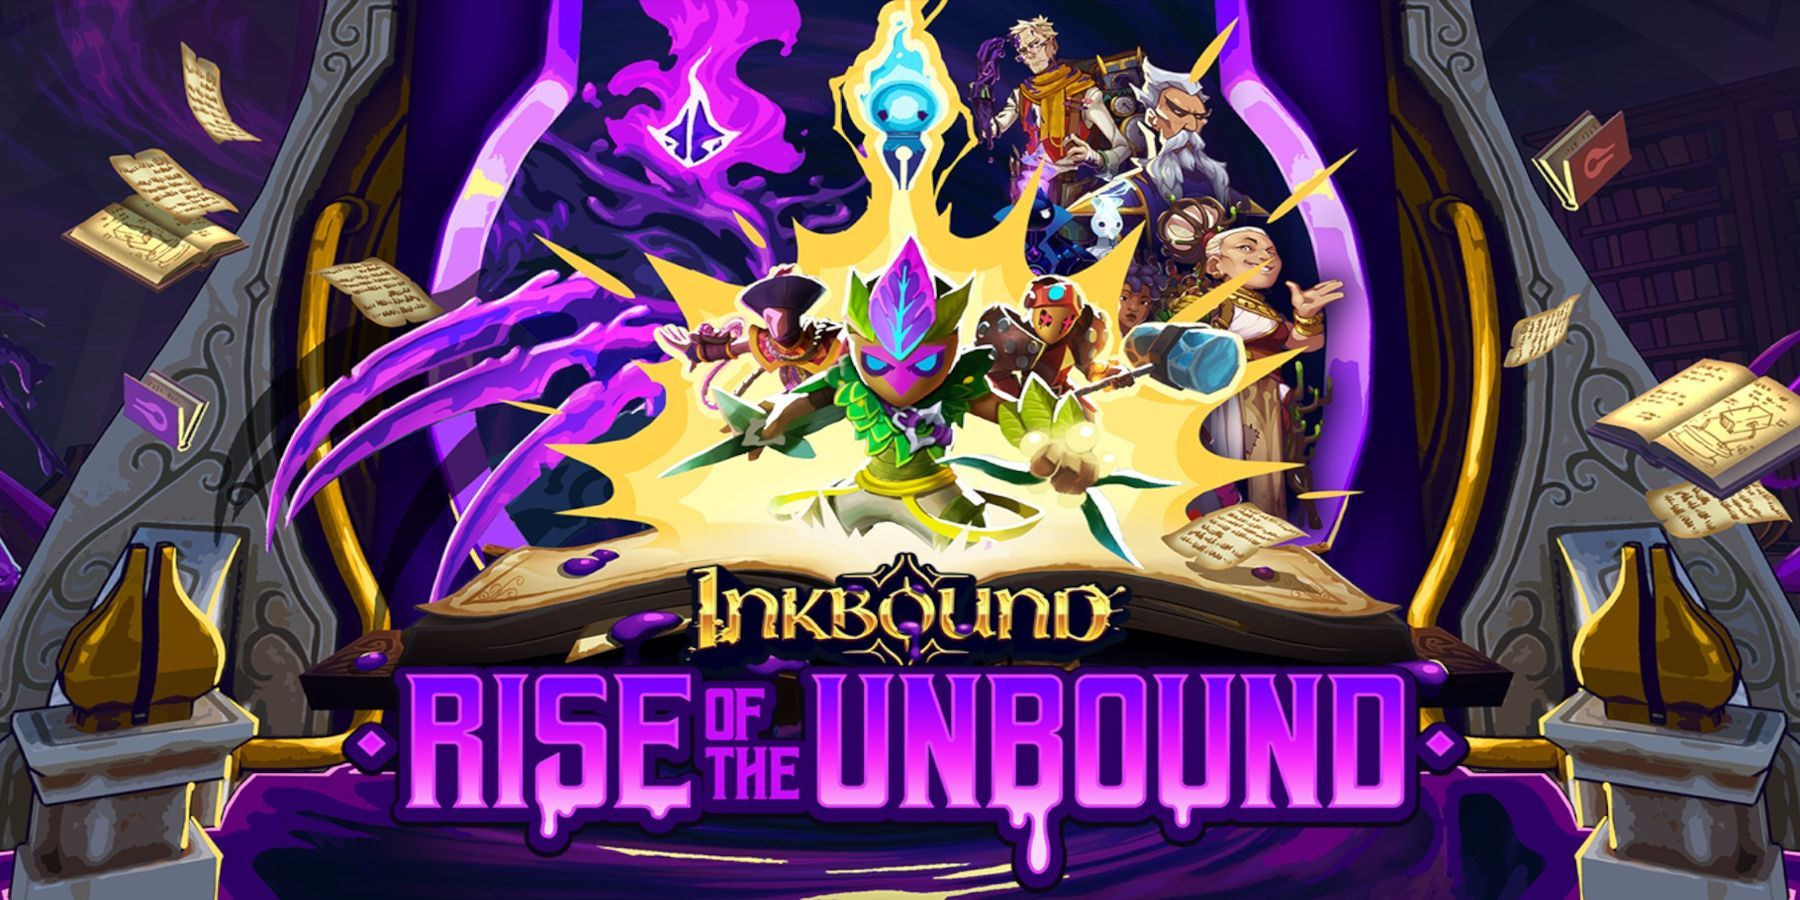 Inkbound Review